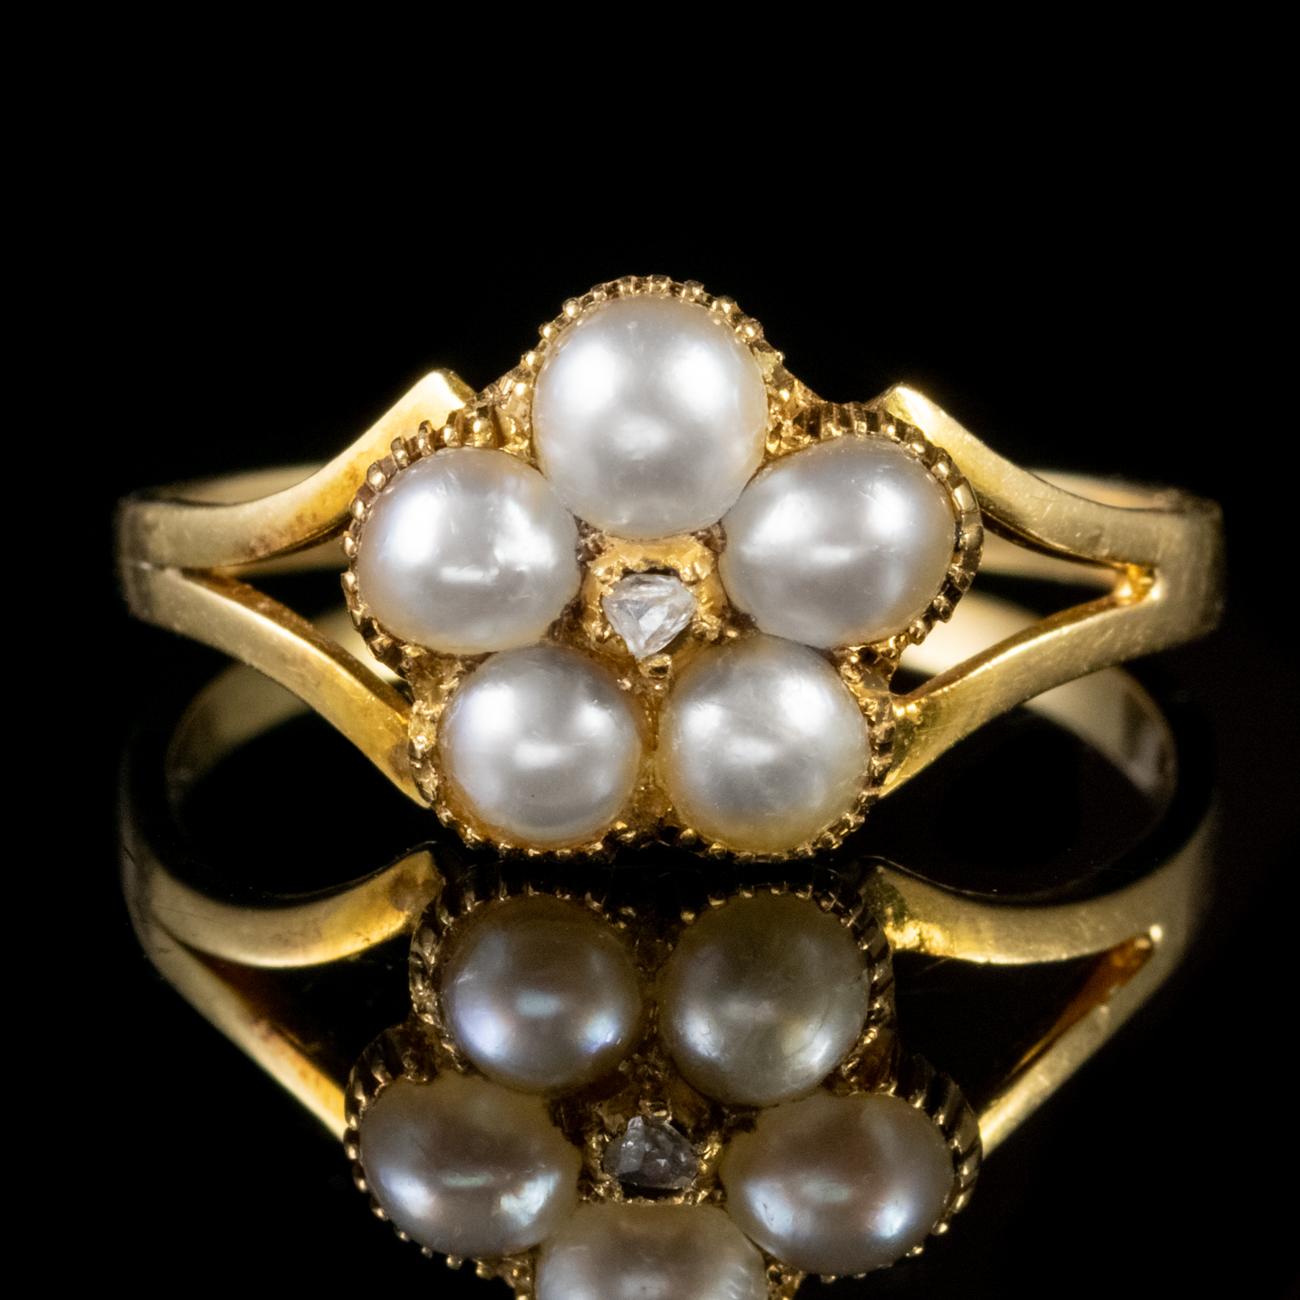 This beautiful Antique Victorian ring has been commissioned in 18ct Yellow Gold and is set with a cluster of five natural Pearls surrounding a 0.07ct Diamond. The stones are set in an ornate milgrain gallery.

The ring also features a locket back